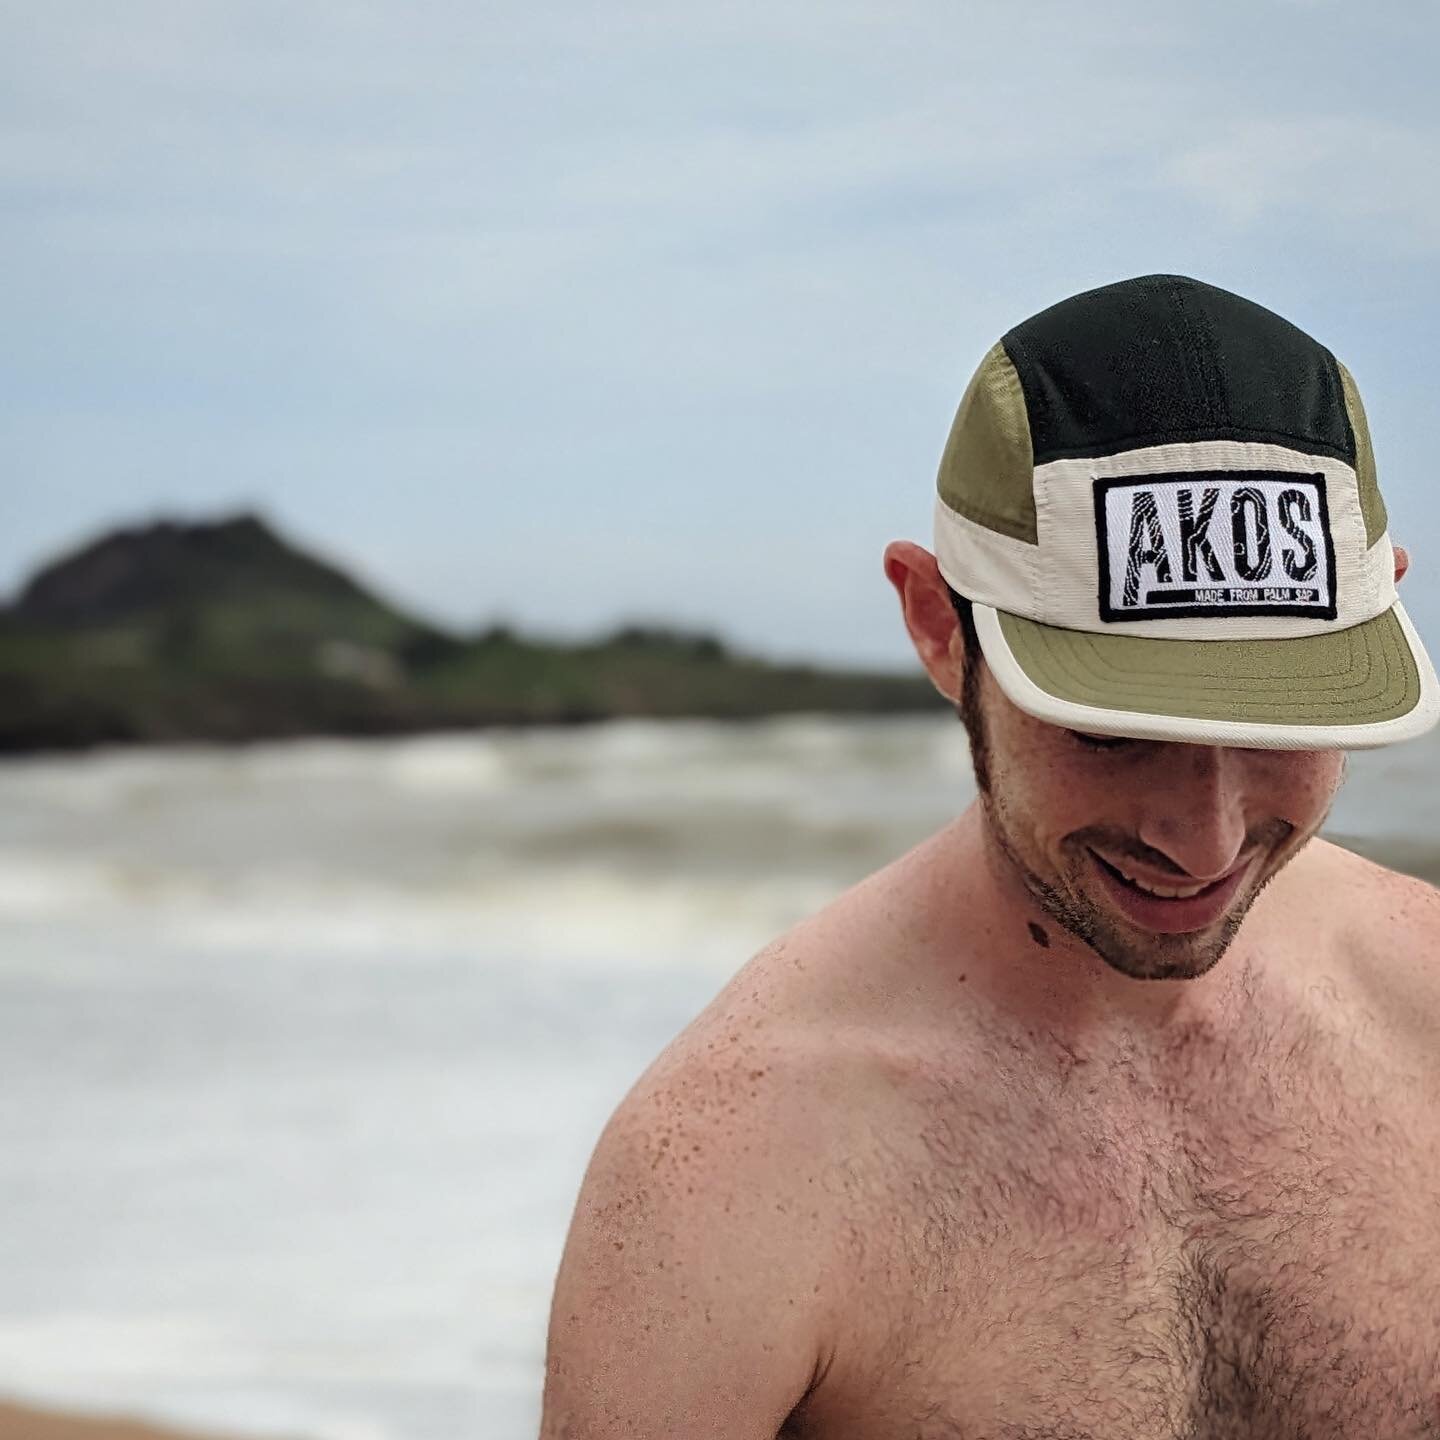 The new Akos &ldquo;Go Birds&rdquo; Cap passes the vibe check out in 
South East Asia
🏝️✌️🦅
.
.
.
#gobirds #philly #palmsapseltzer